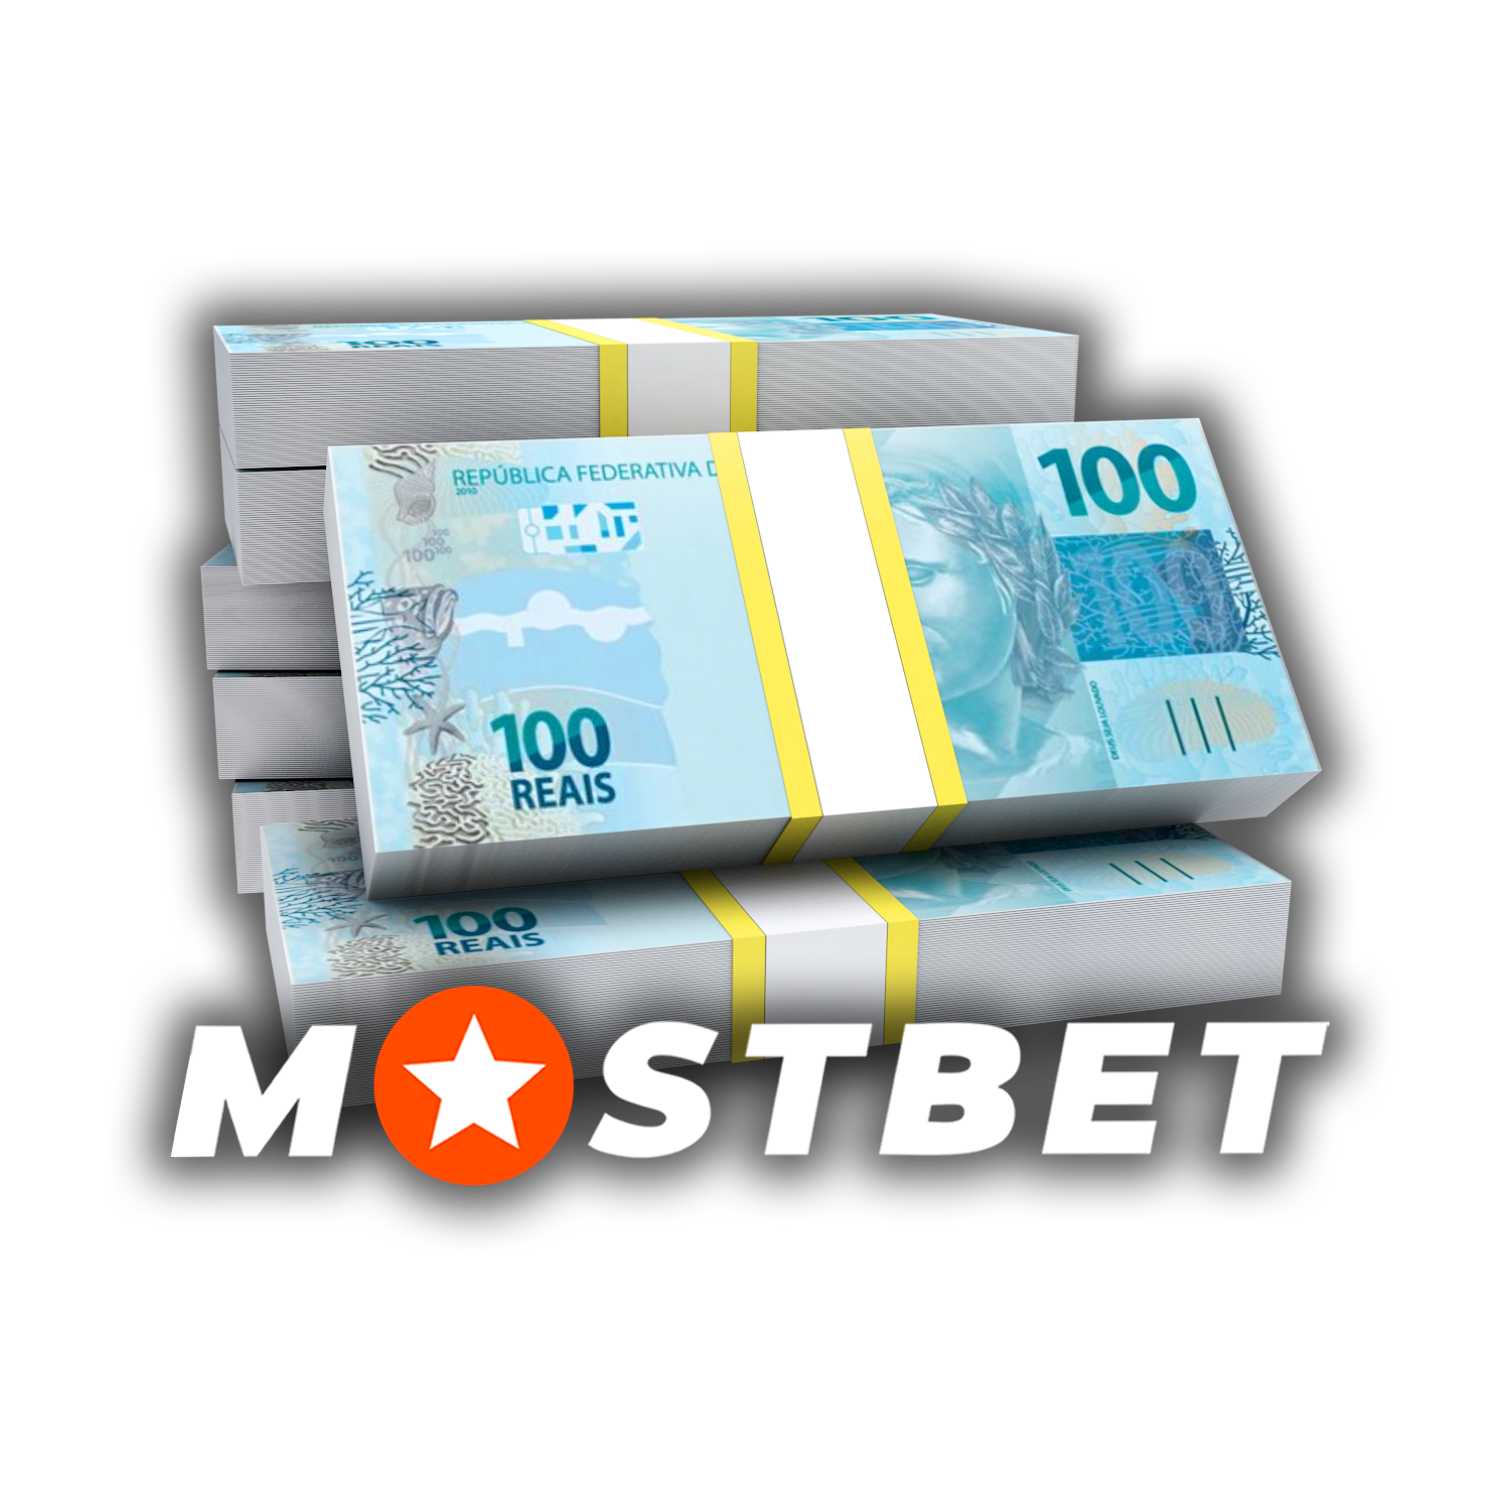 Find out how to withdraw winnings from the Mostbet account.